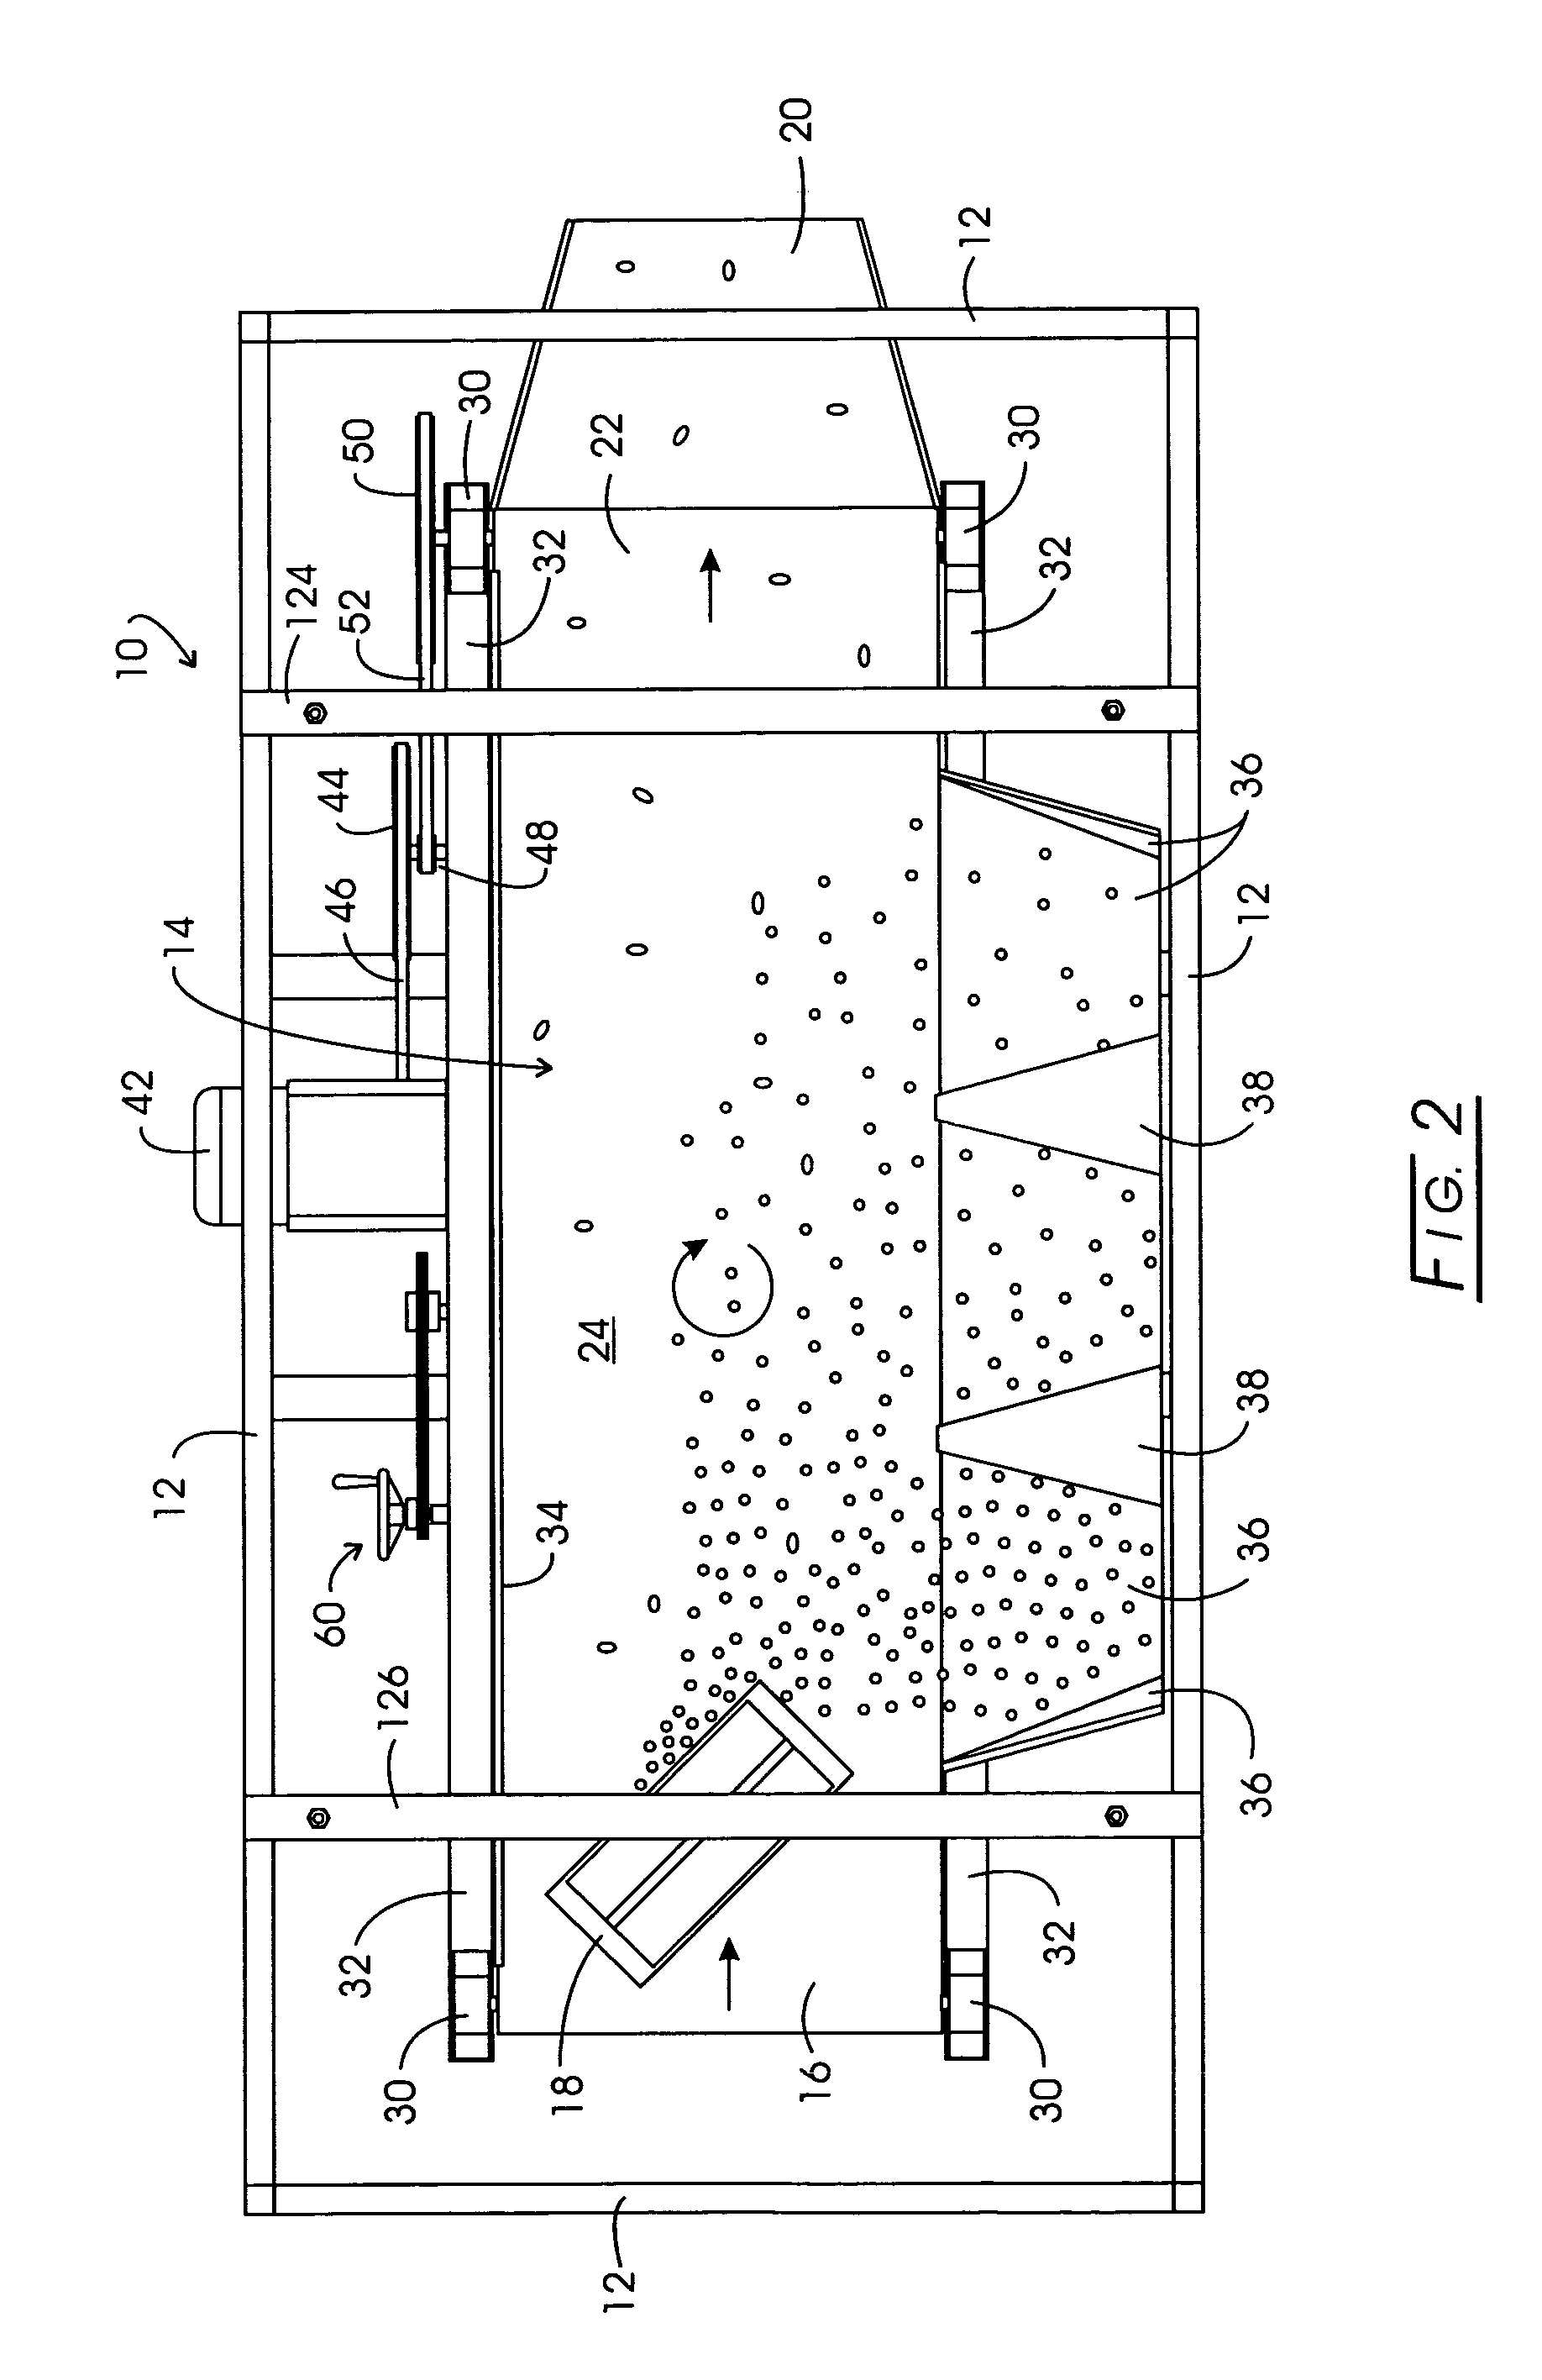 Food-stuff physical characteristic sorting apparatus and method